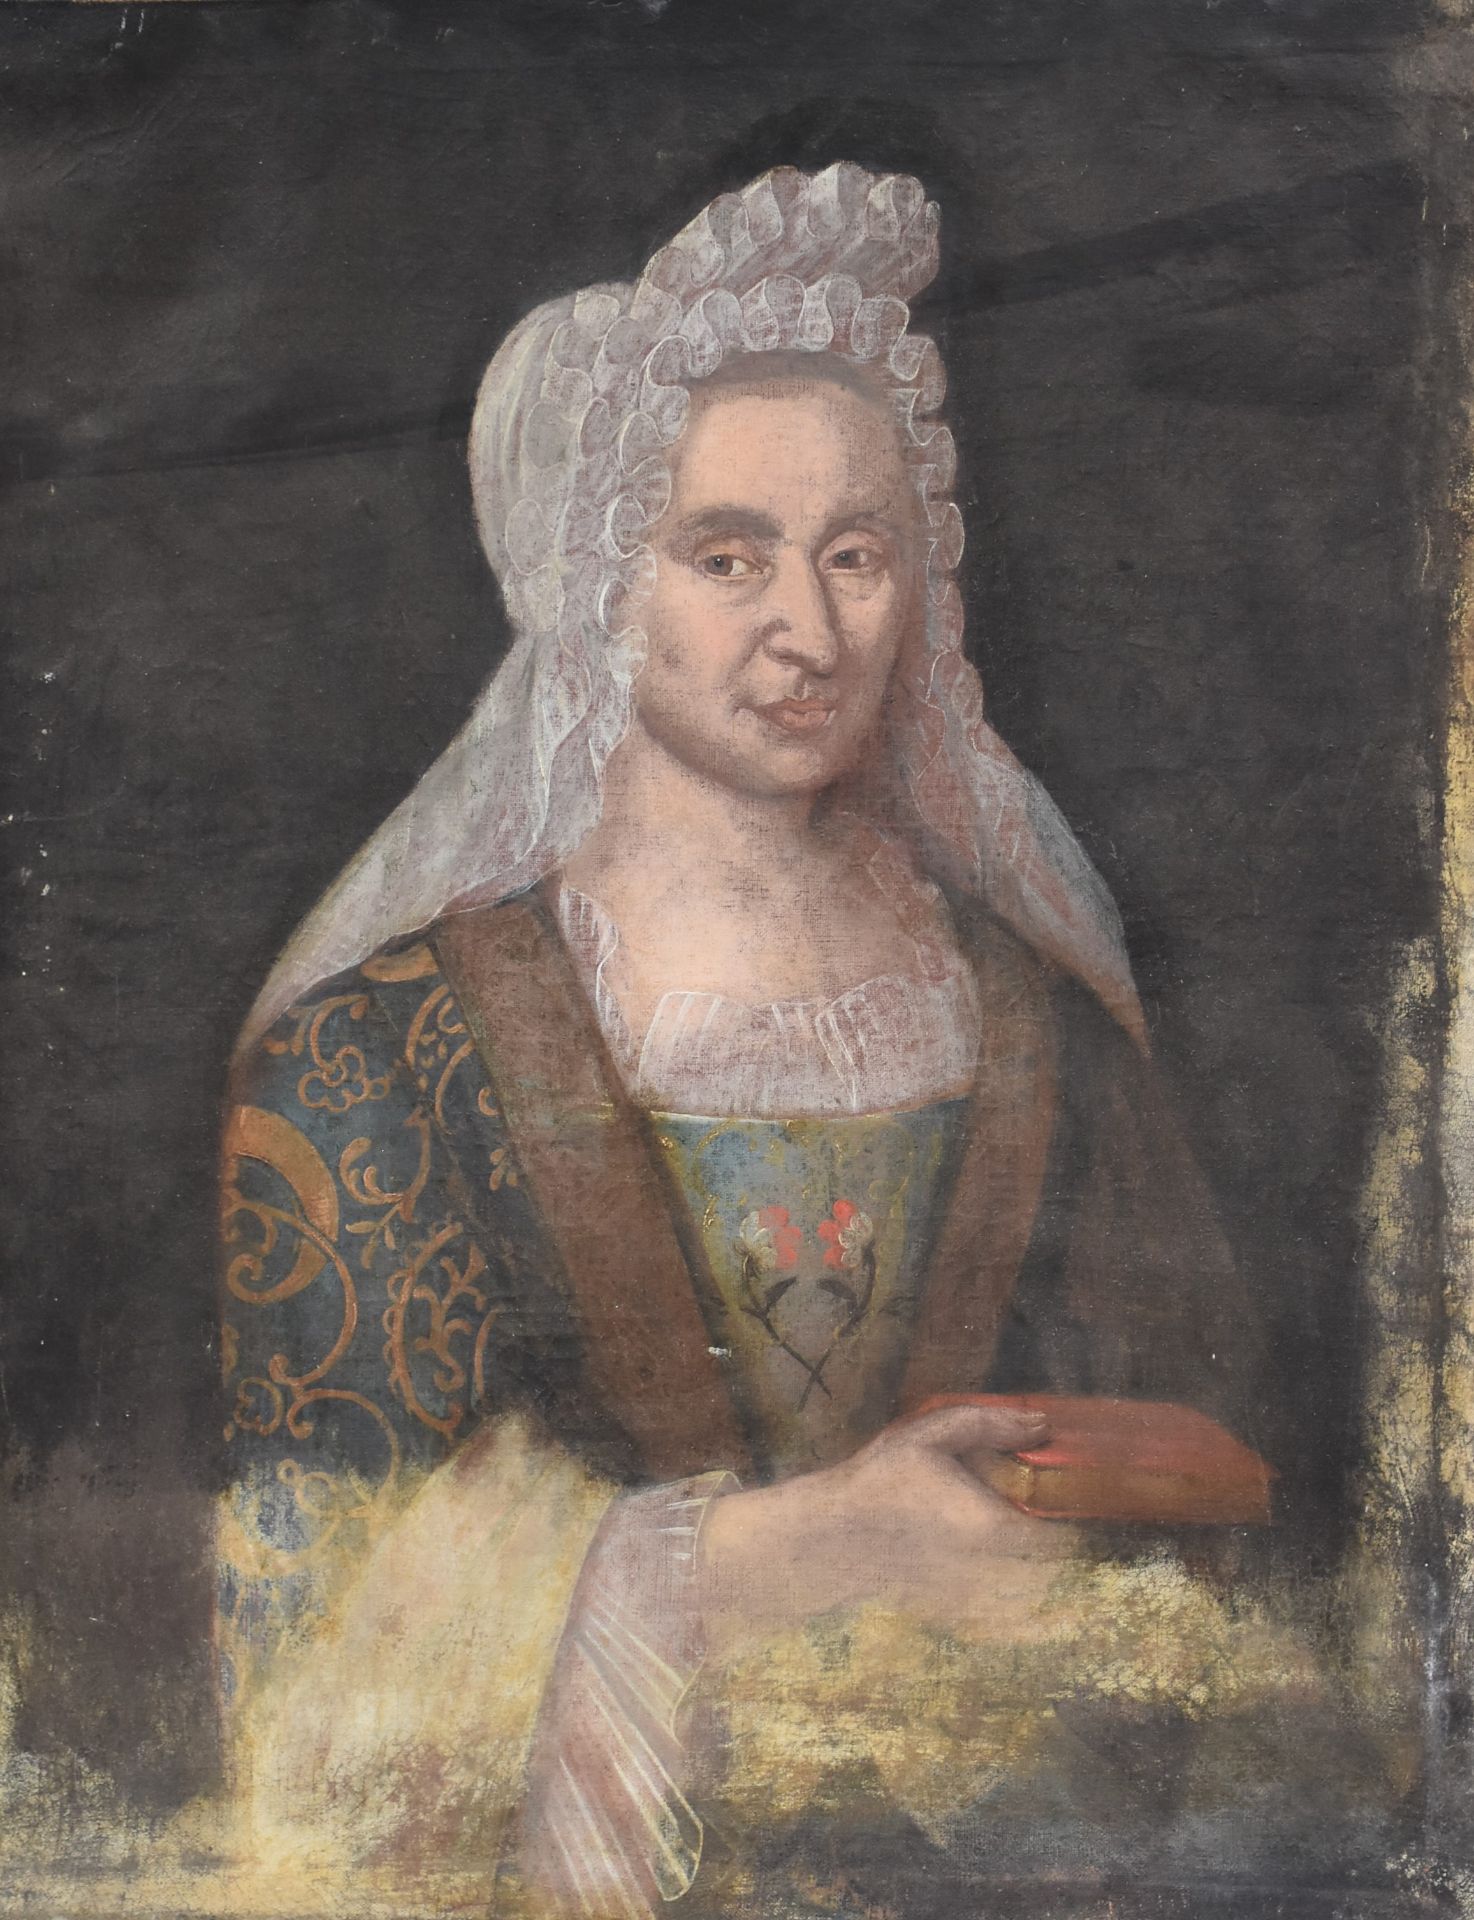 18th century portrait of the widow Pinondel, mother of 15 children, aged 49 and a half in the year 1 - Image 2 of 4